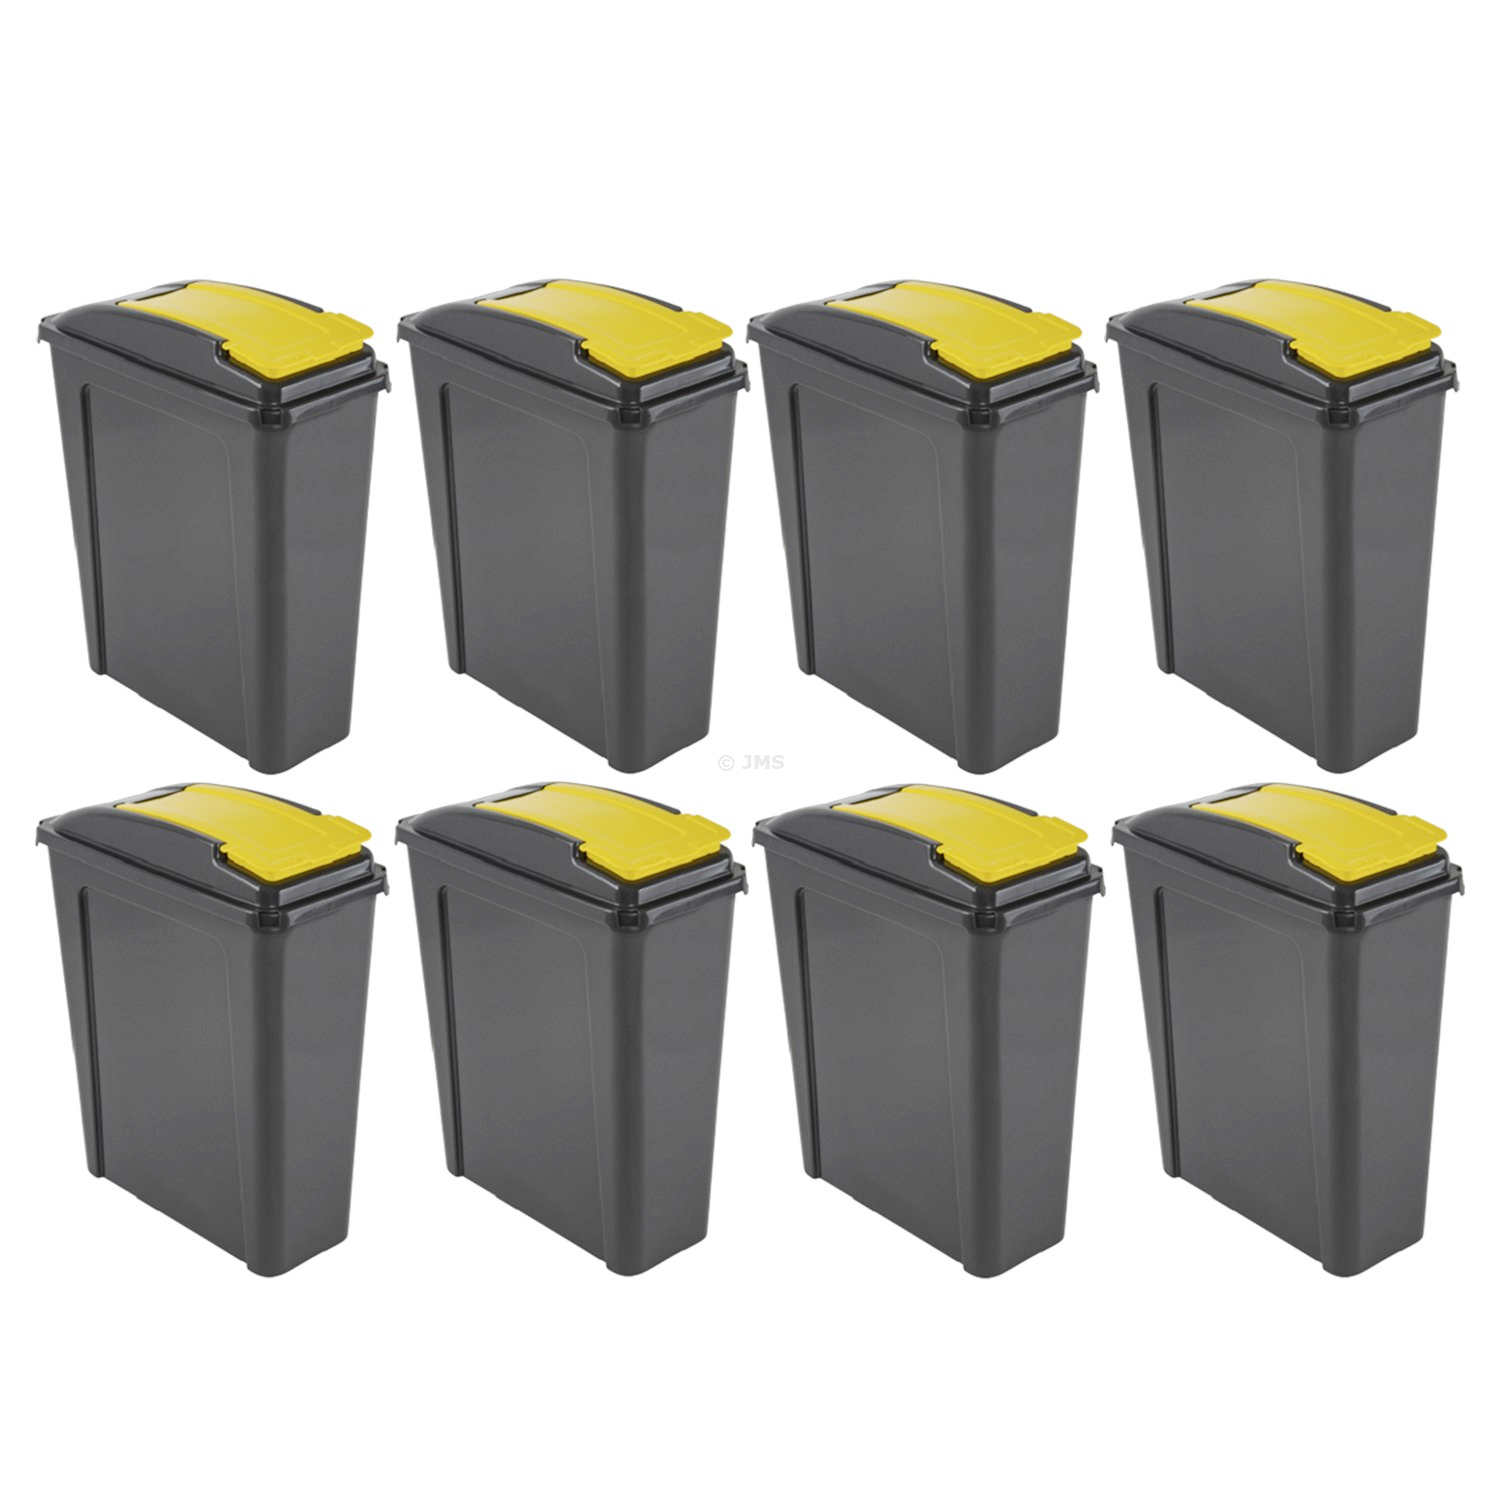 [Set of 8] Plastic Recycle Recycling Waste Dustbin 25L Slimline Bin with Yellow Flap Lid Multi-purpose Storage Container Home Kitchen Garden